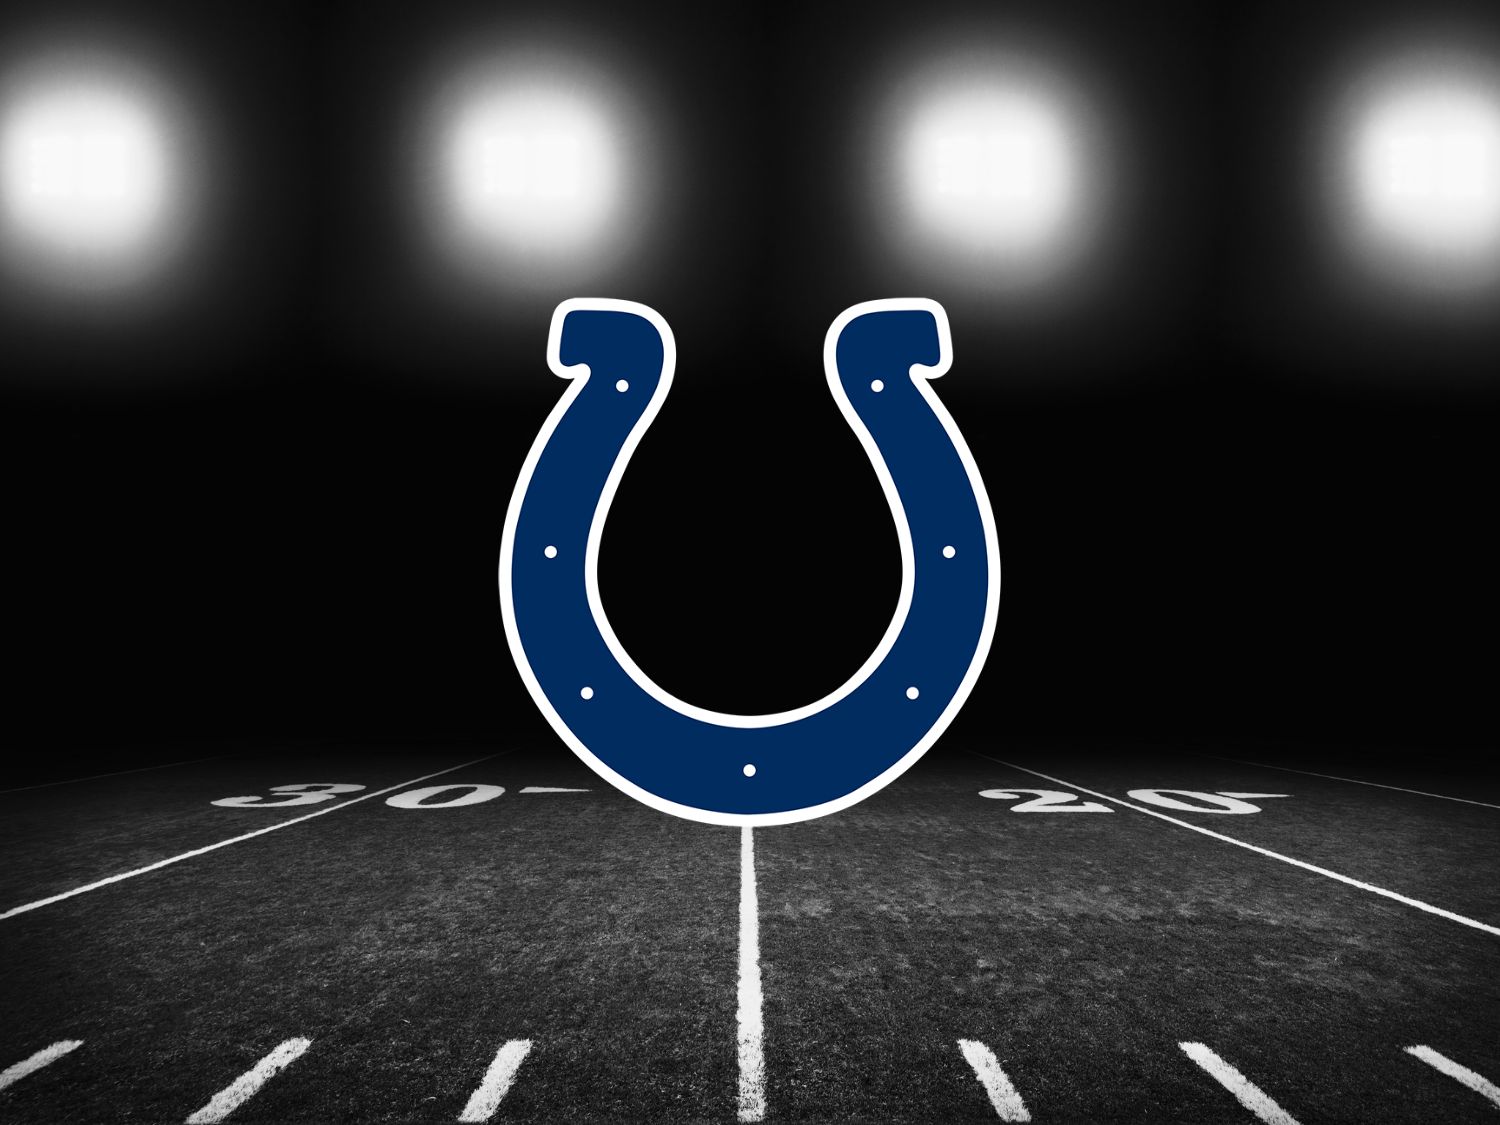 Indianapolis Colts Tickets and Seats